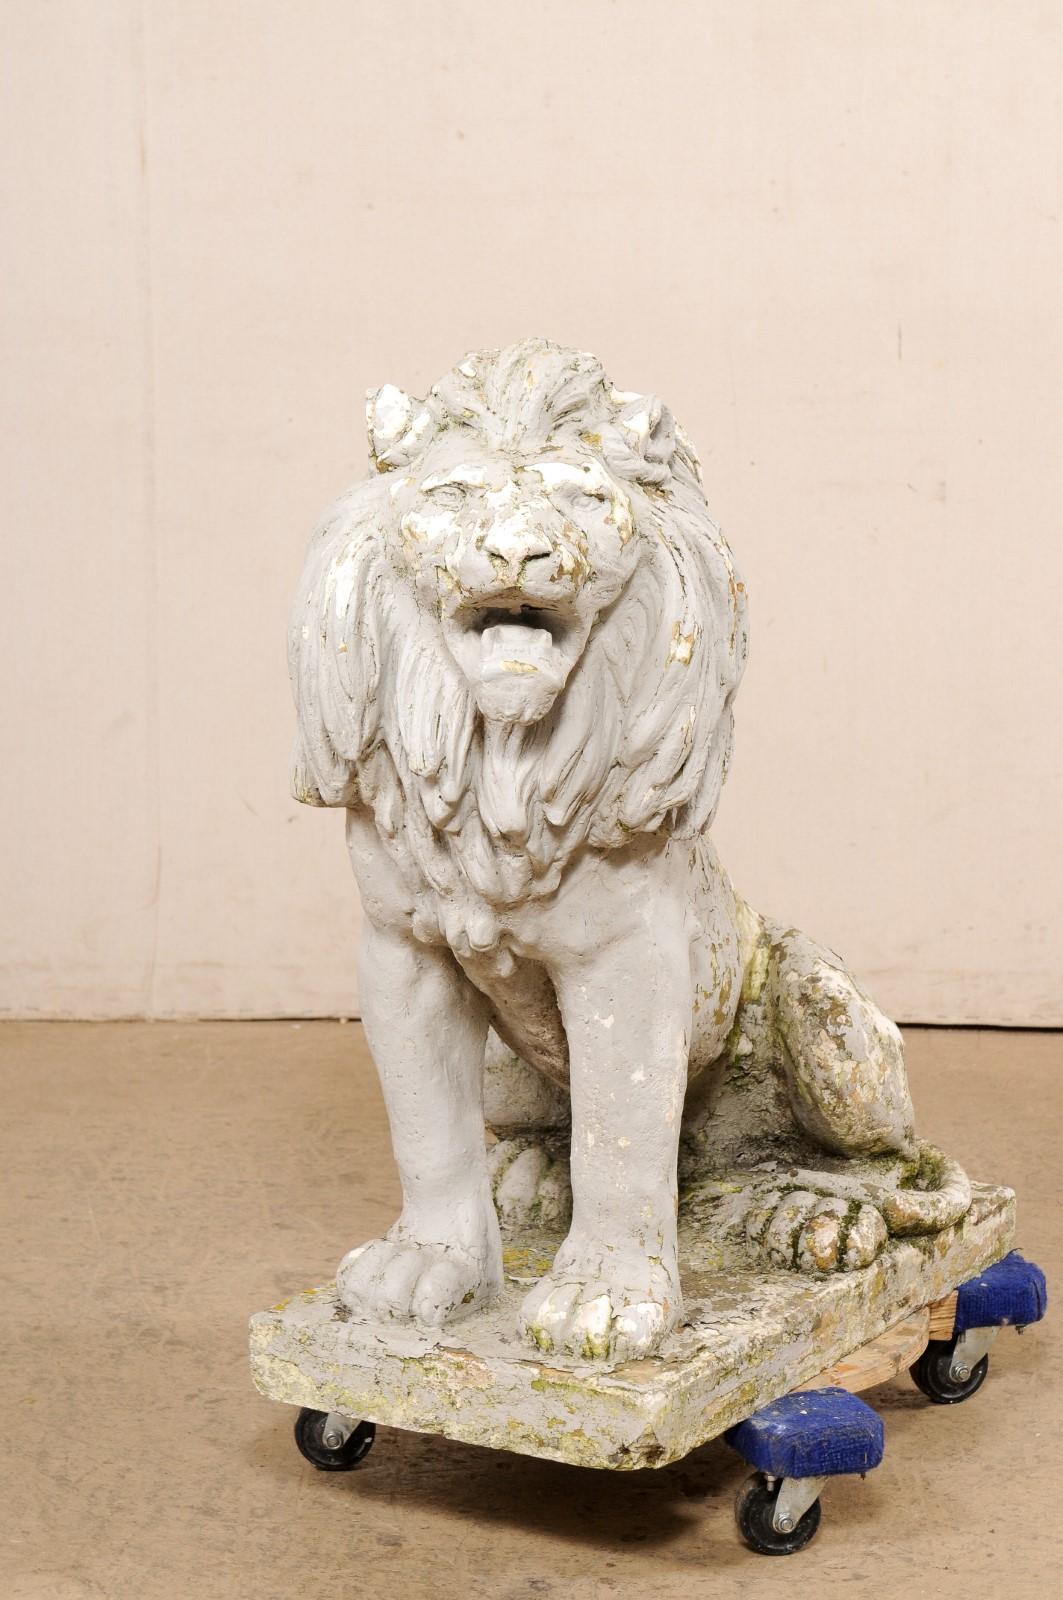 A regal French lion garden statue. This vintage cast-stone lion statue from France is abundant with fabulous details, such as the nicely textured mane, alert eyes, and open mouth. He is positioned in a seating position with tail wrapping around his